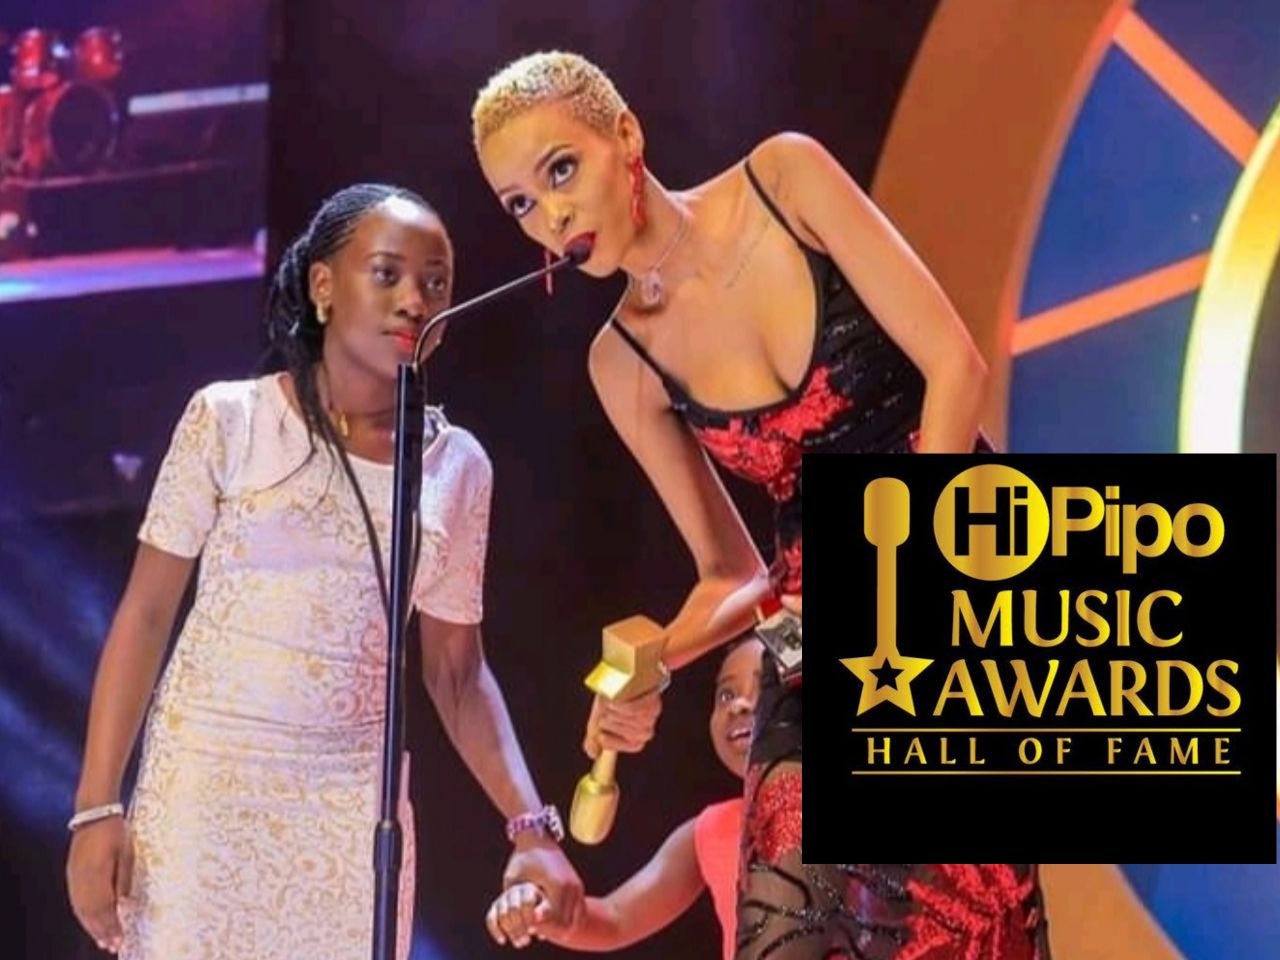 The 2020 Hipipo Music Awards to be Held Online